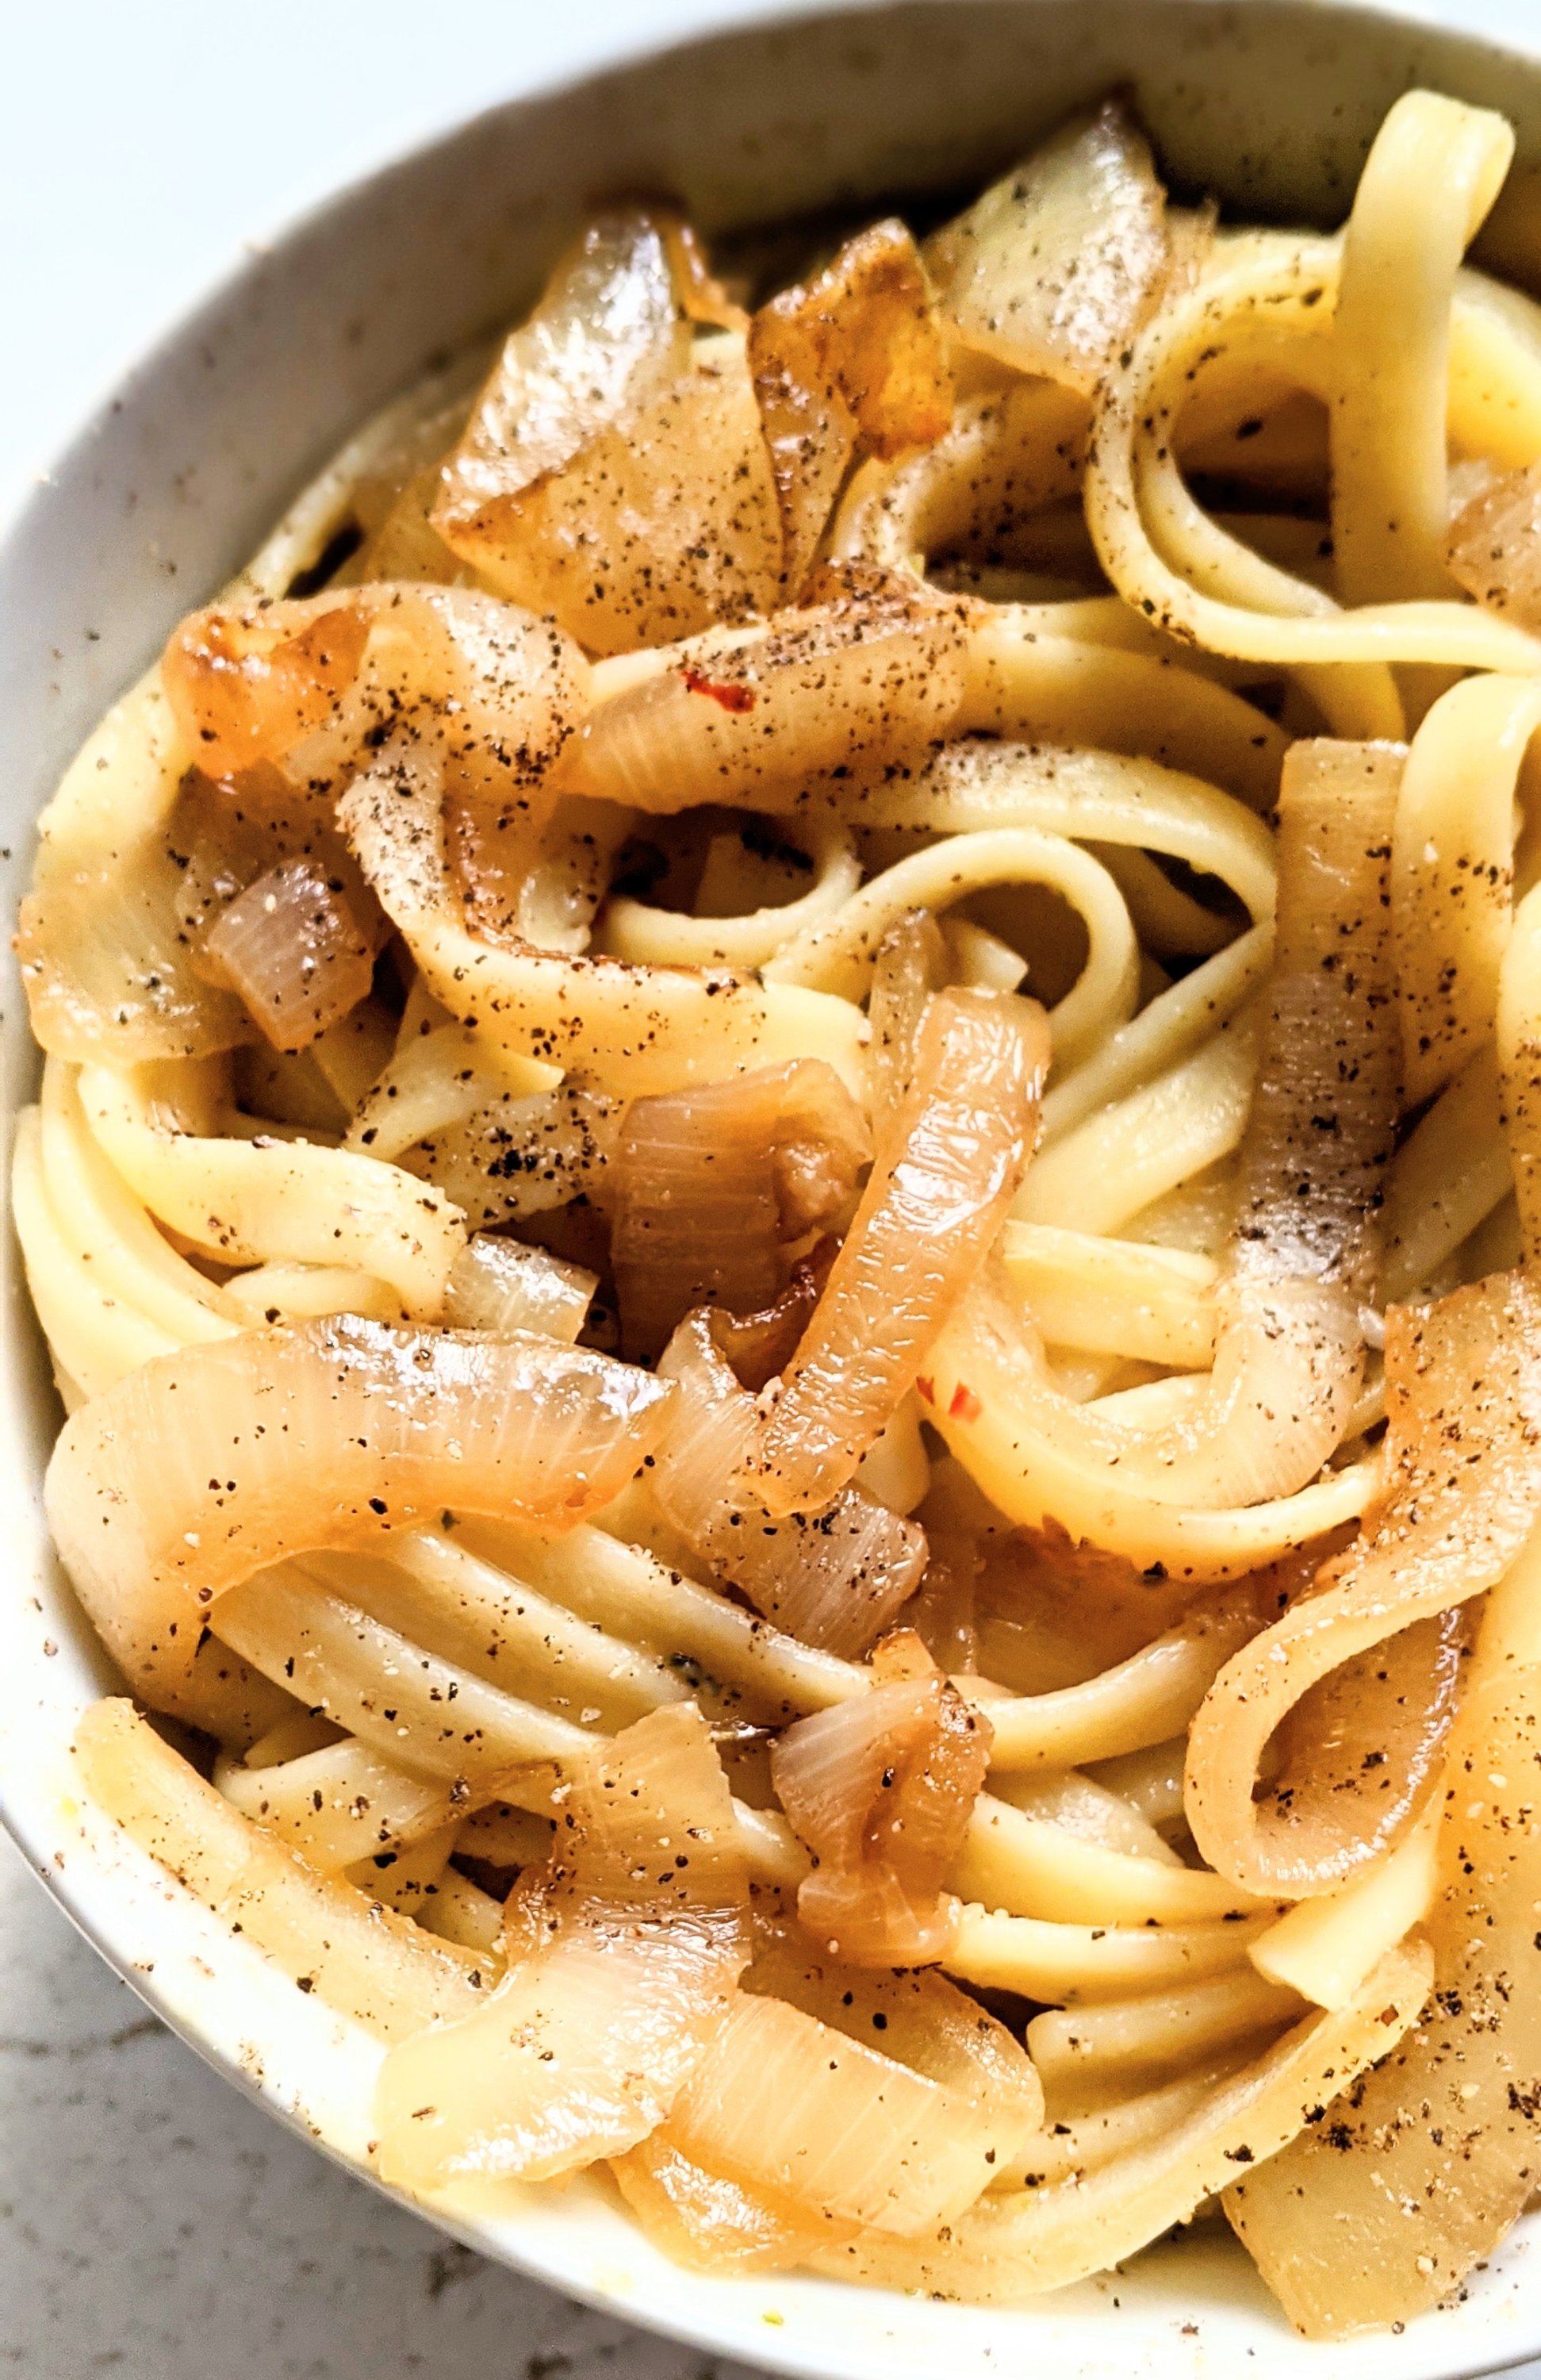 vegan onion alfredo sauce with caramelised onion pasta gluten free noodles with onions recipe with gluten free linguine or fettuccini and caramelized onions in the dutch oven